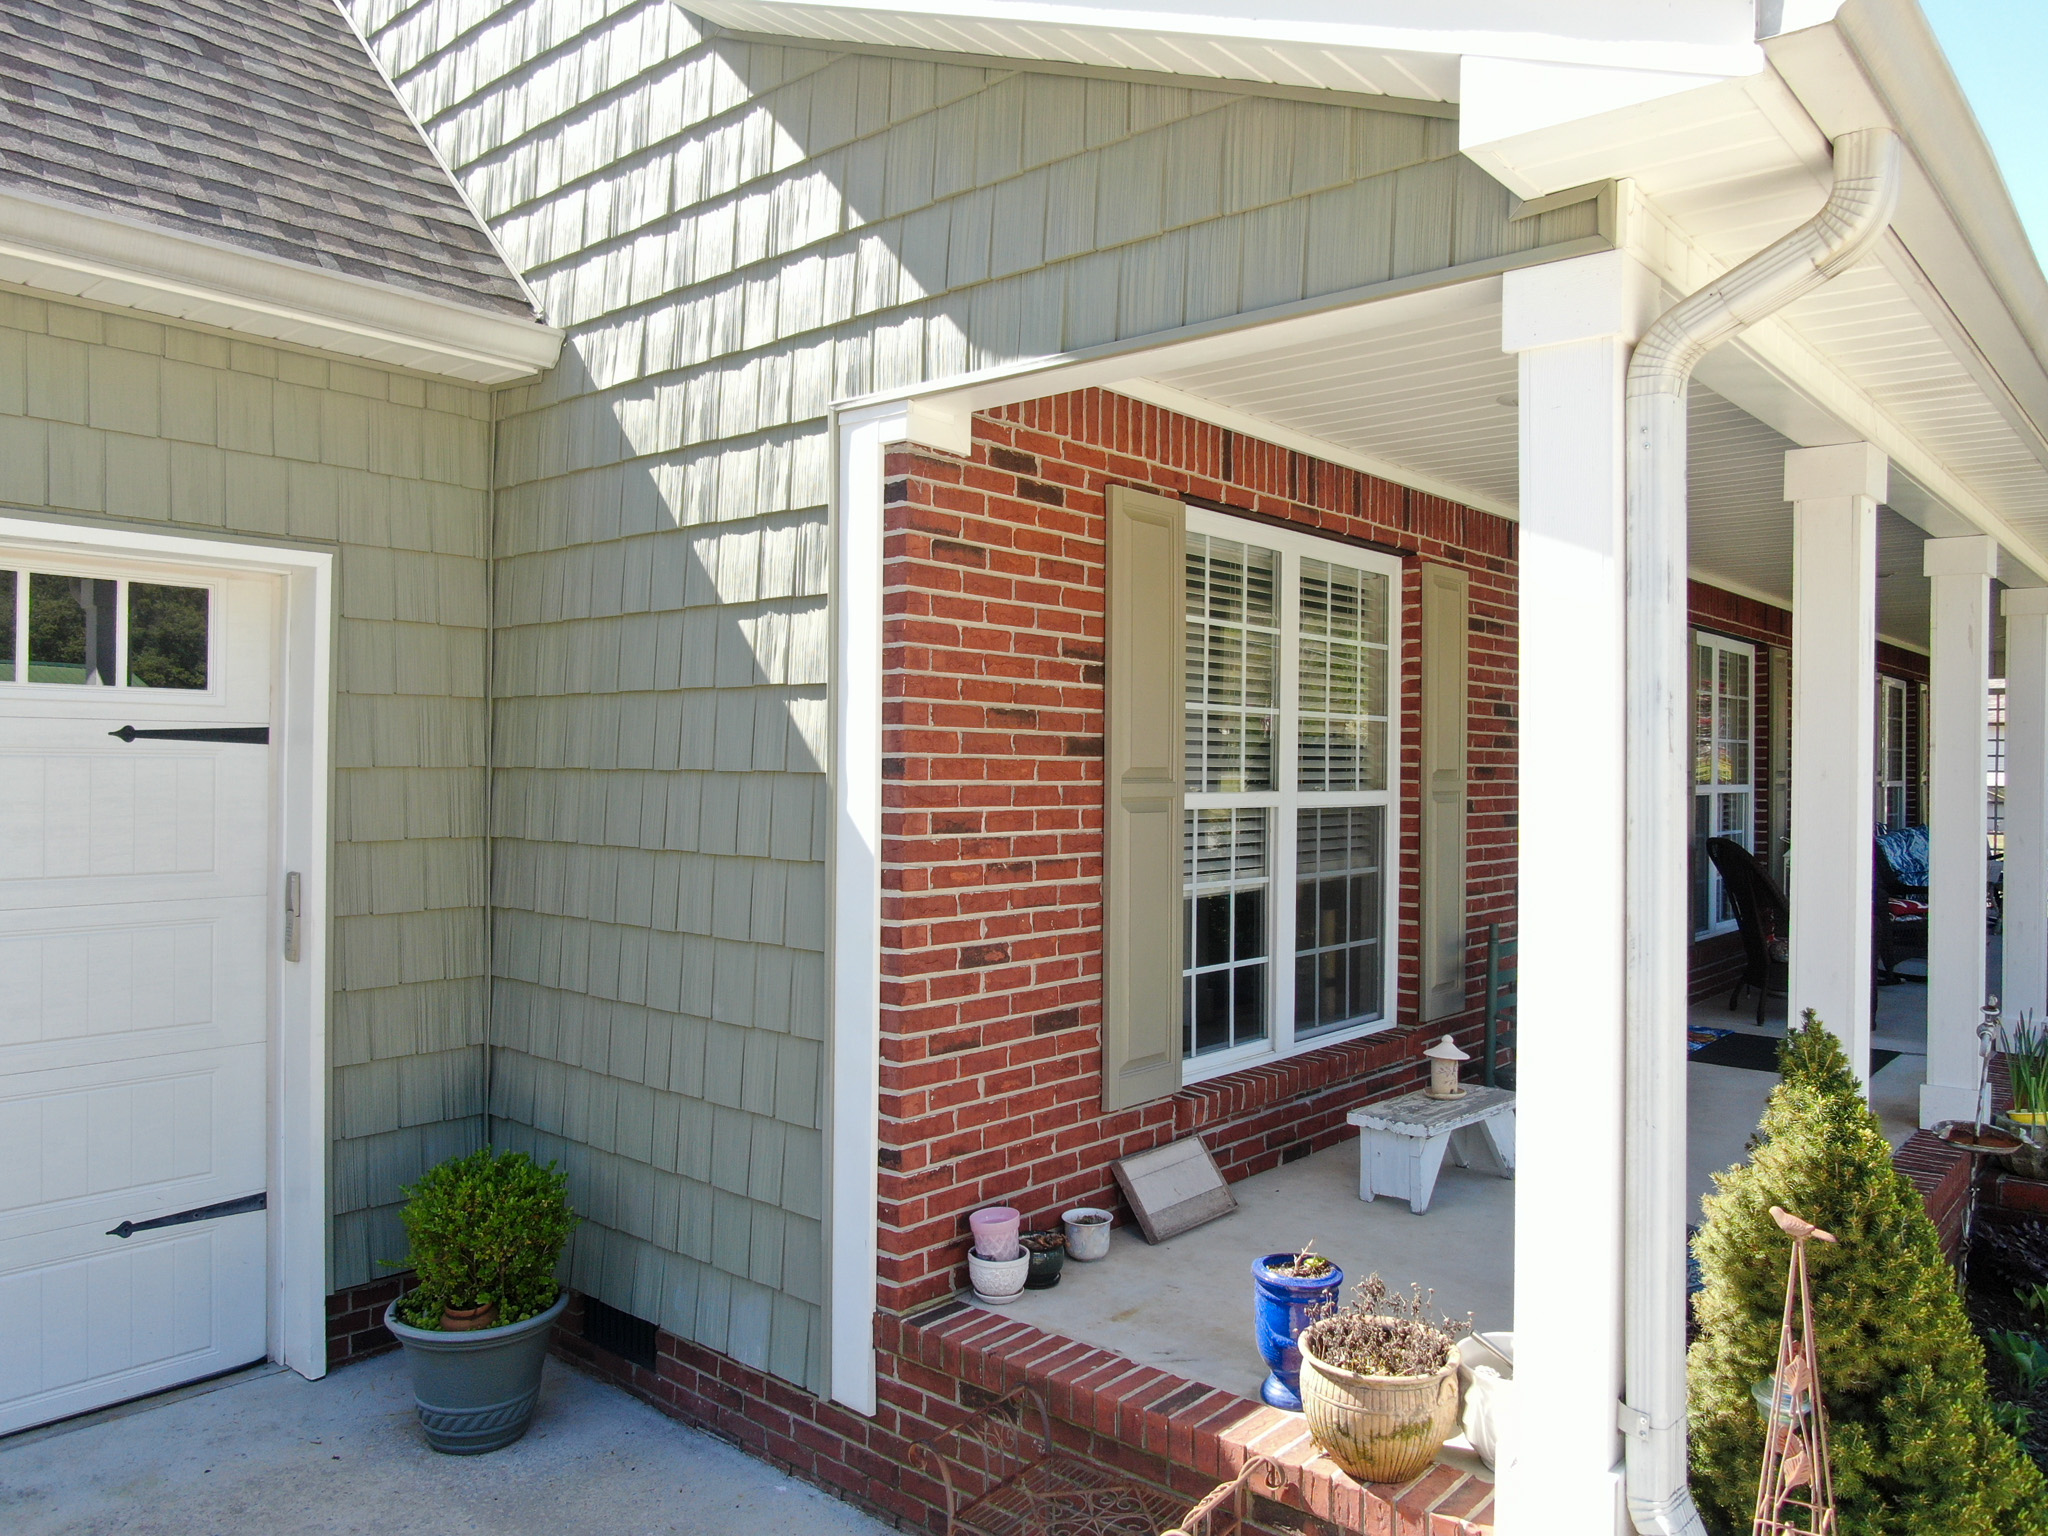 siding replacement company in chattanooga